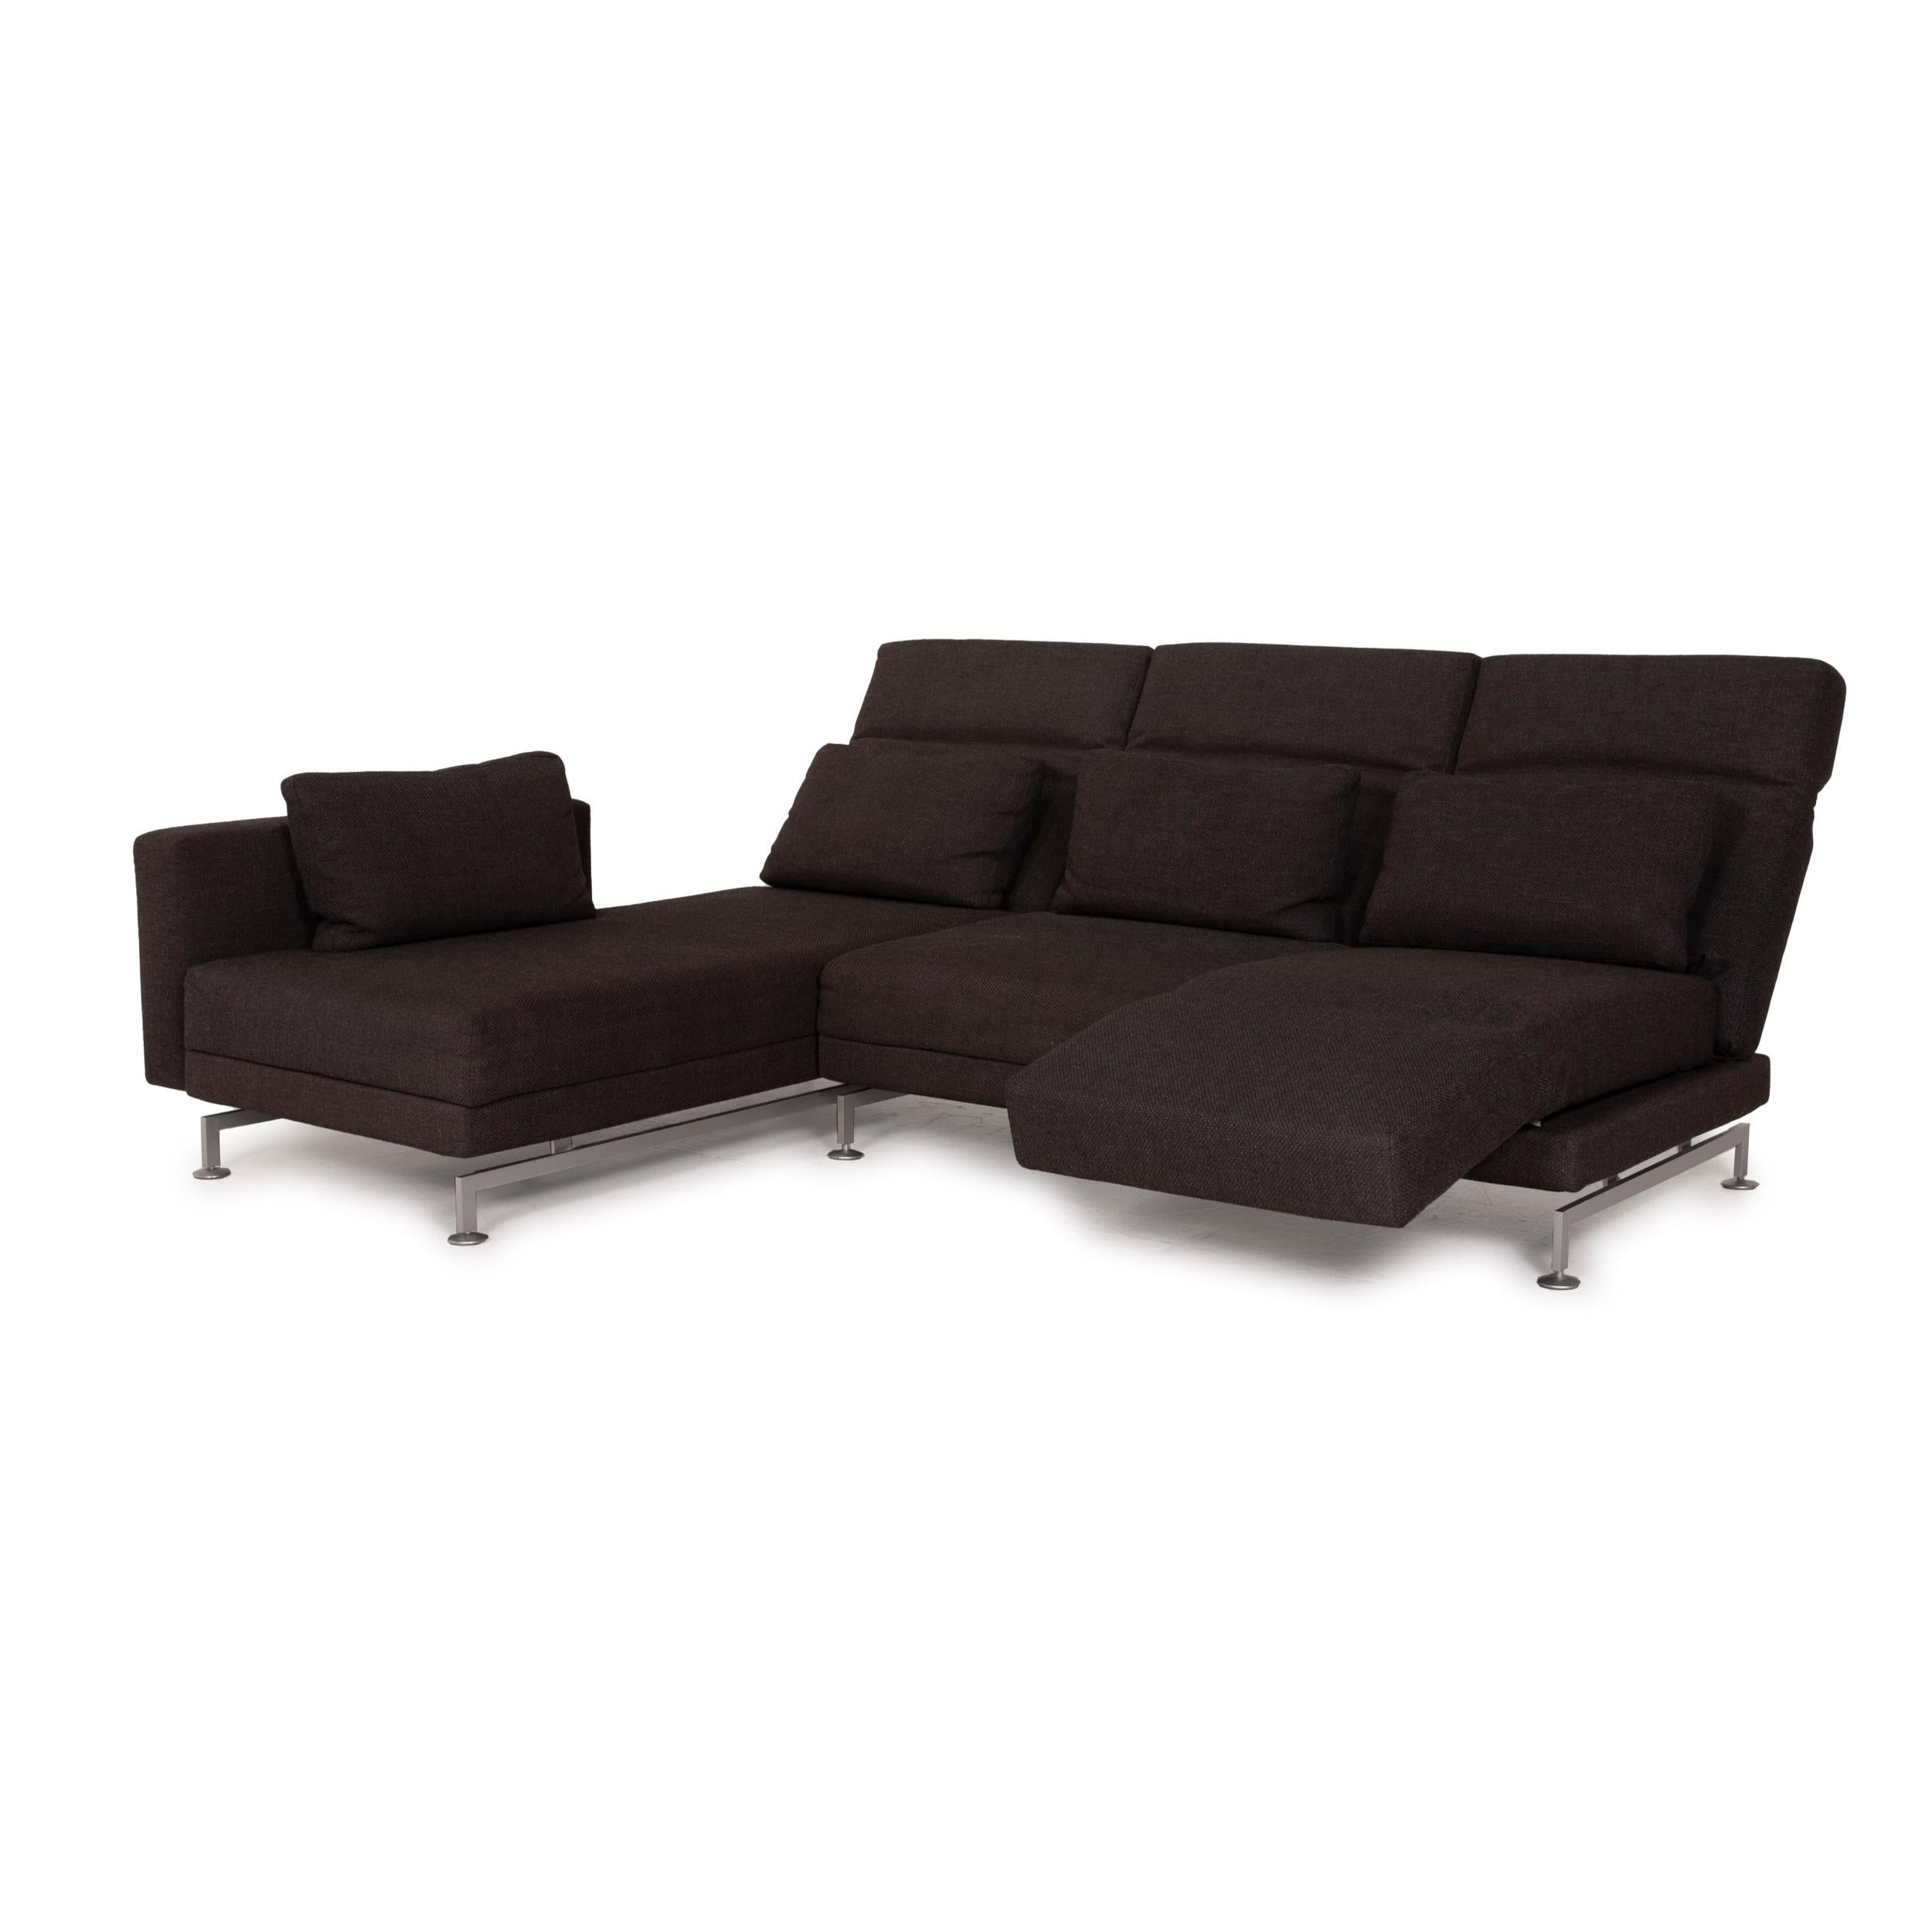 Modern Brühl & Sippold Moule Fabric Sofa Brown Corner Sofa Function Relaxation